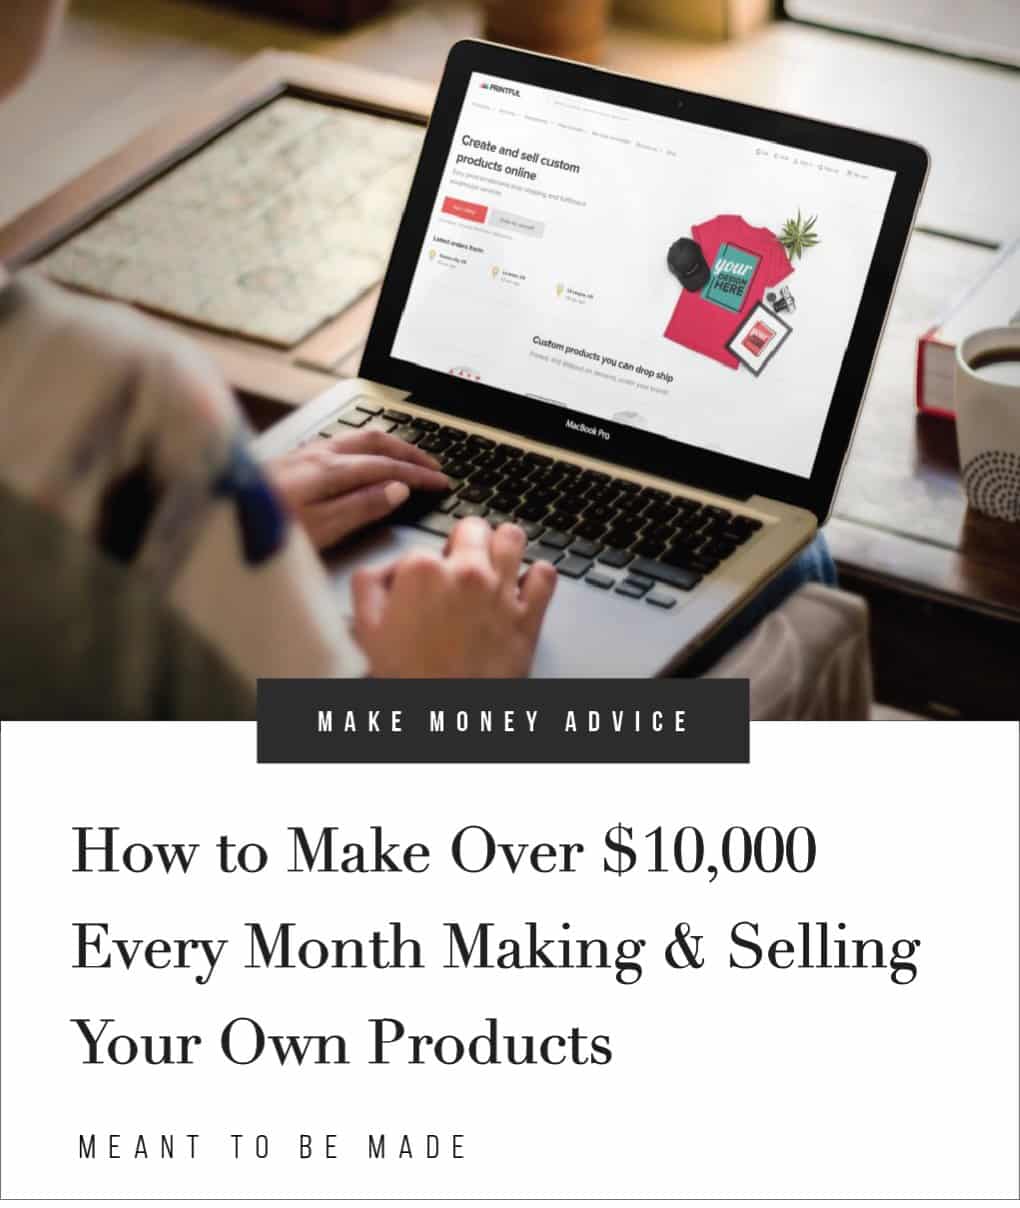 How to Make Over $10,000 Every Month Making & Selling Your Own Products